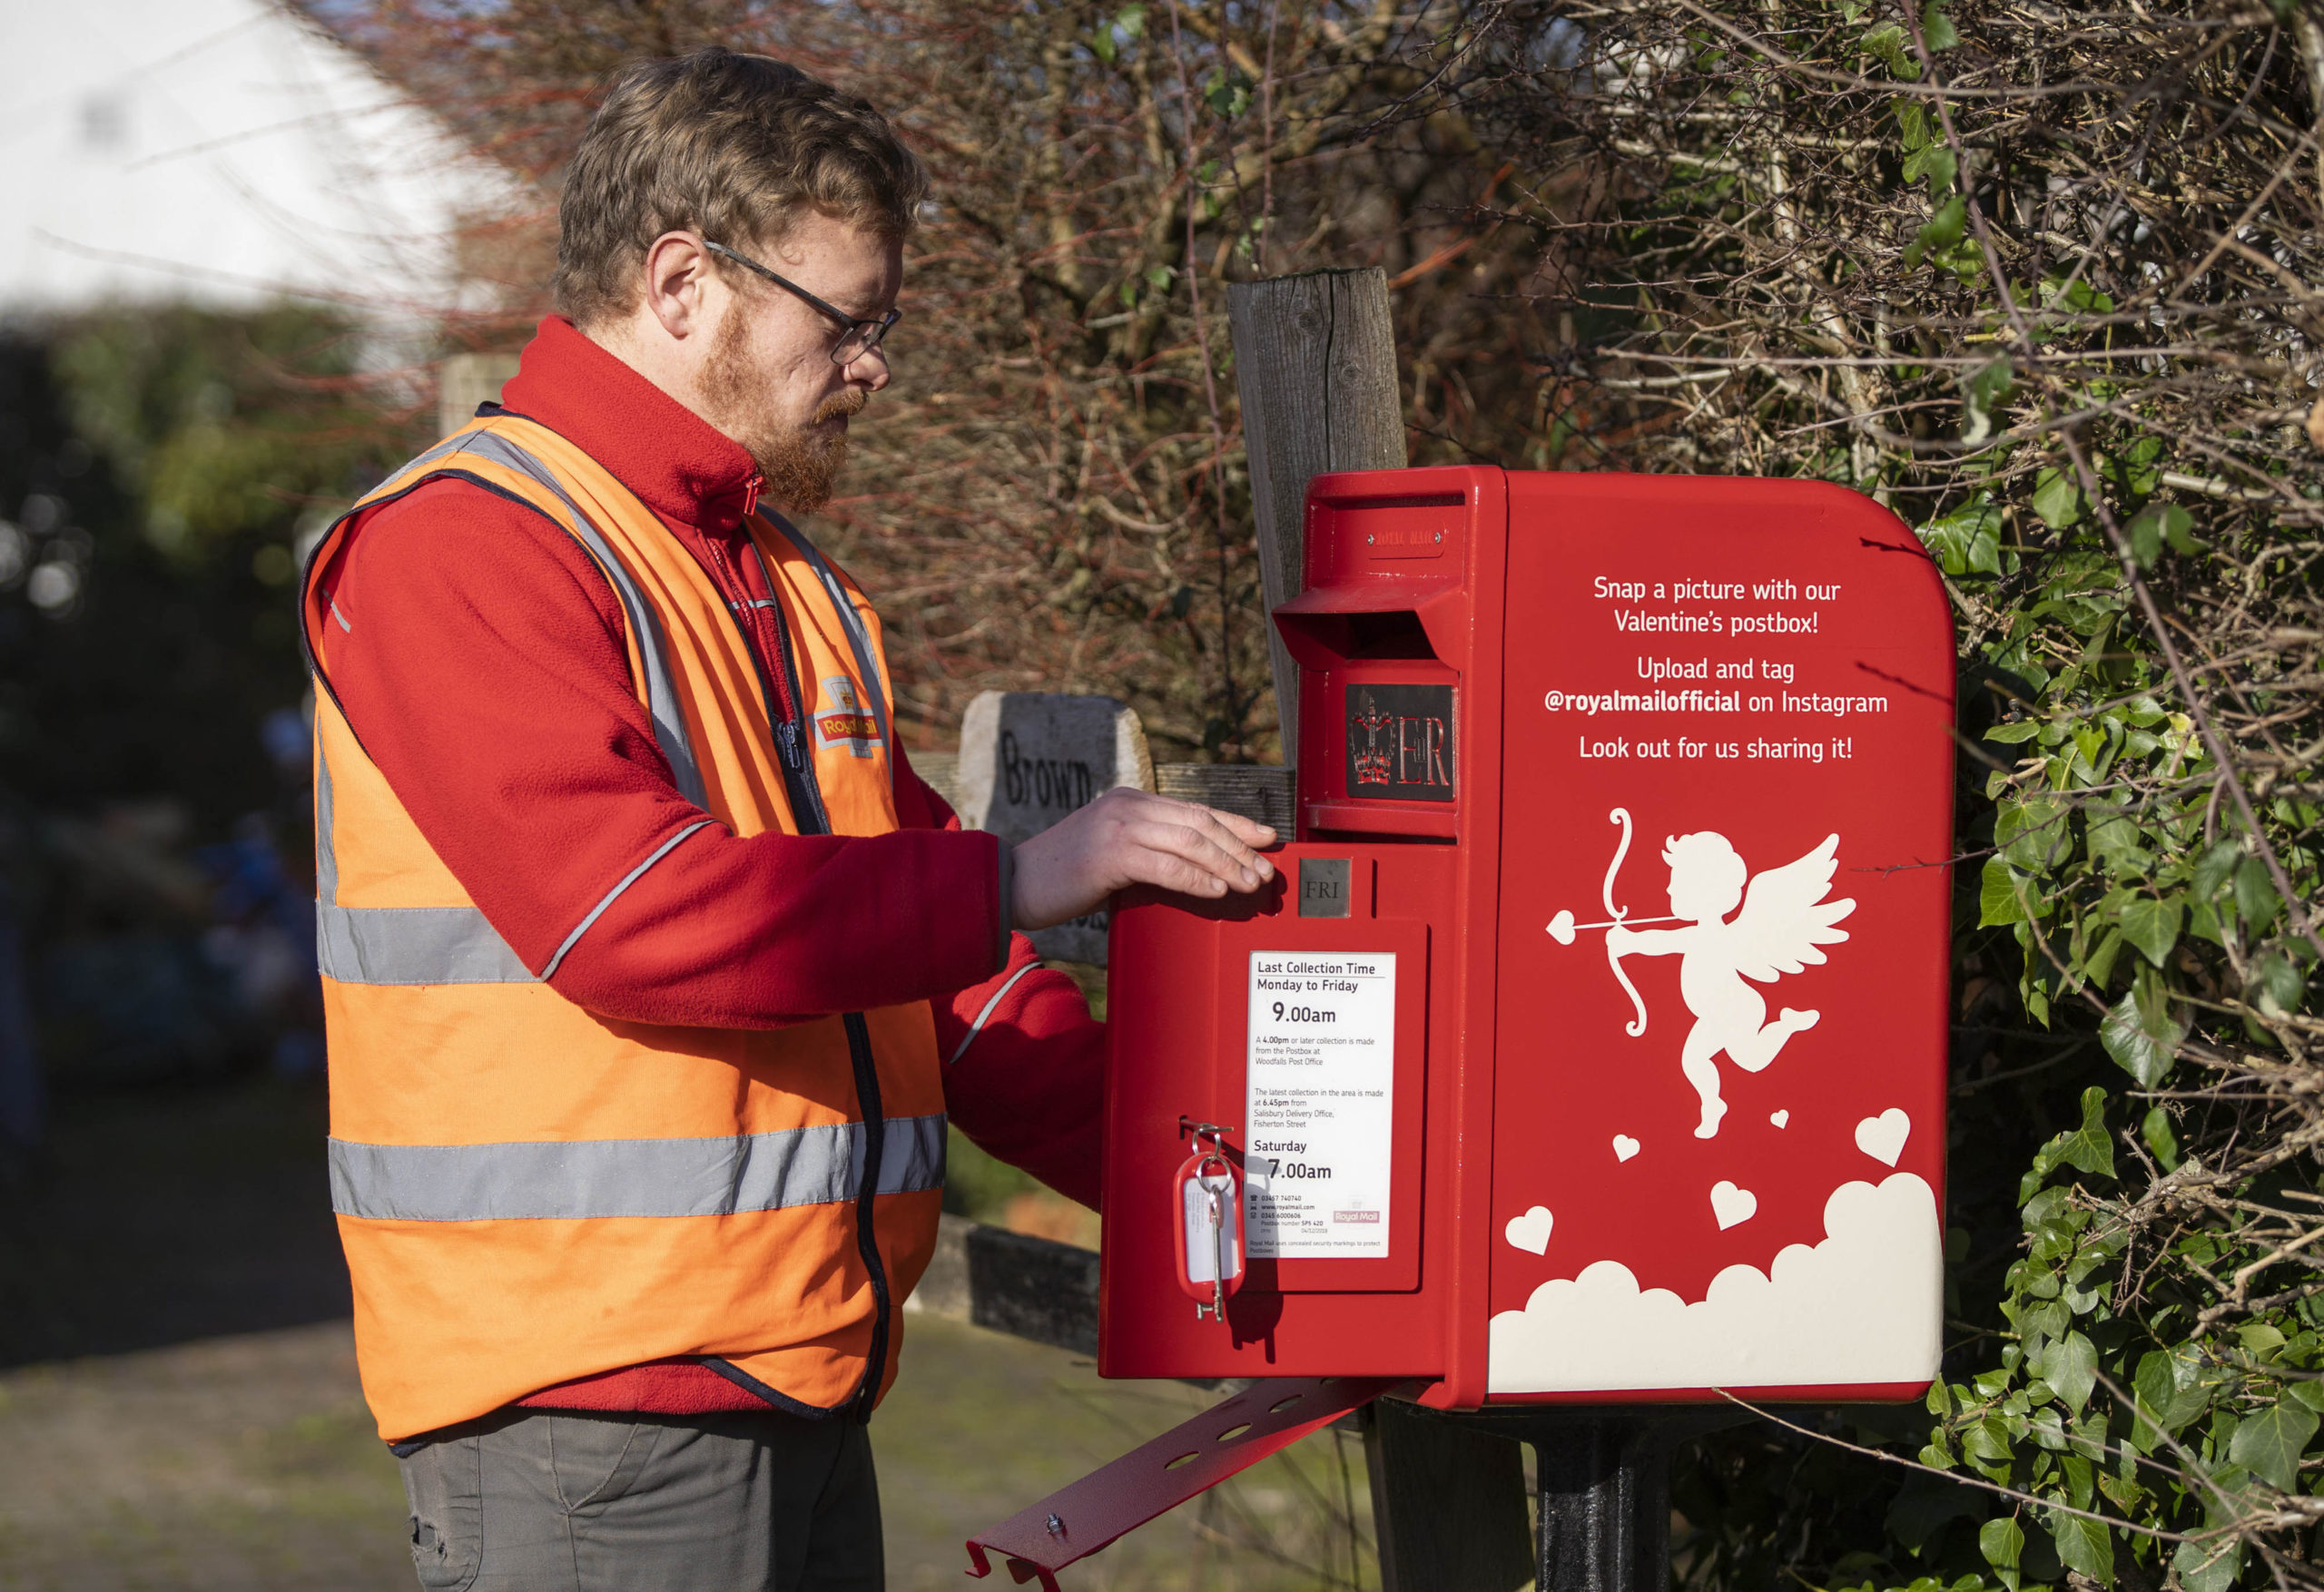 A specially designed Royal Mail post box is unveiled in Lover, Wiltshire